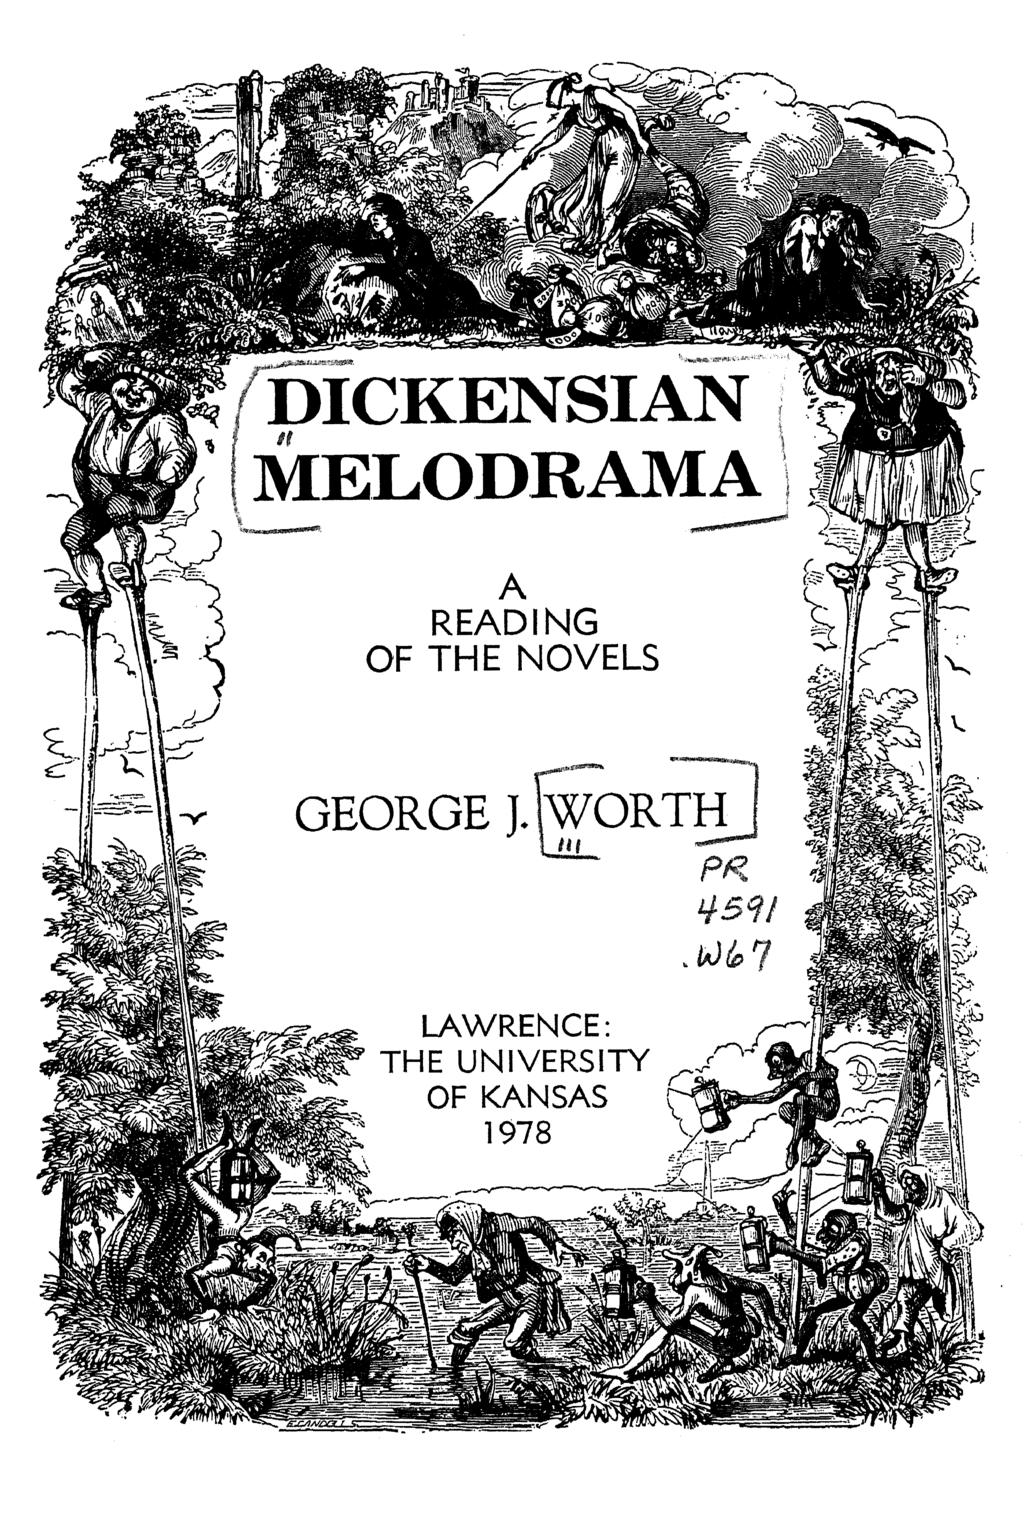 DICKENSIAN MELODRAMA A READING OF THE NOVELS